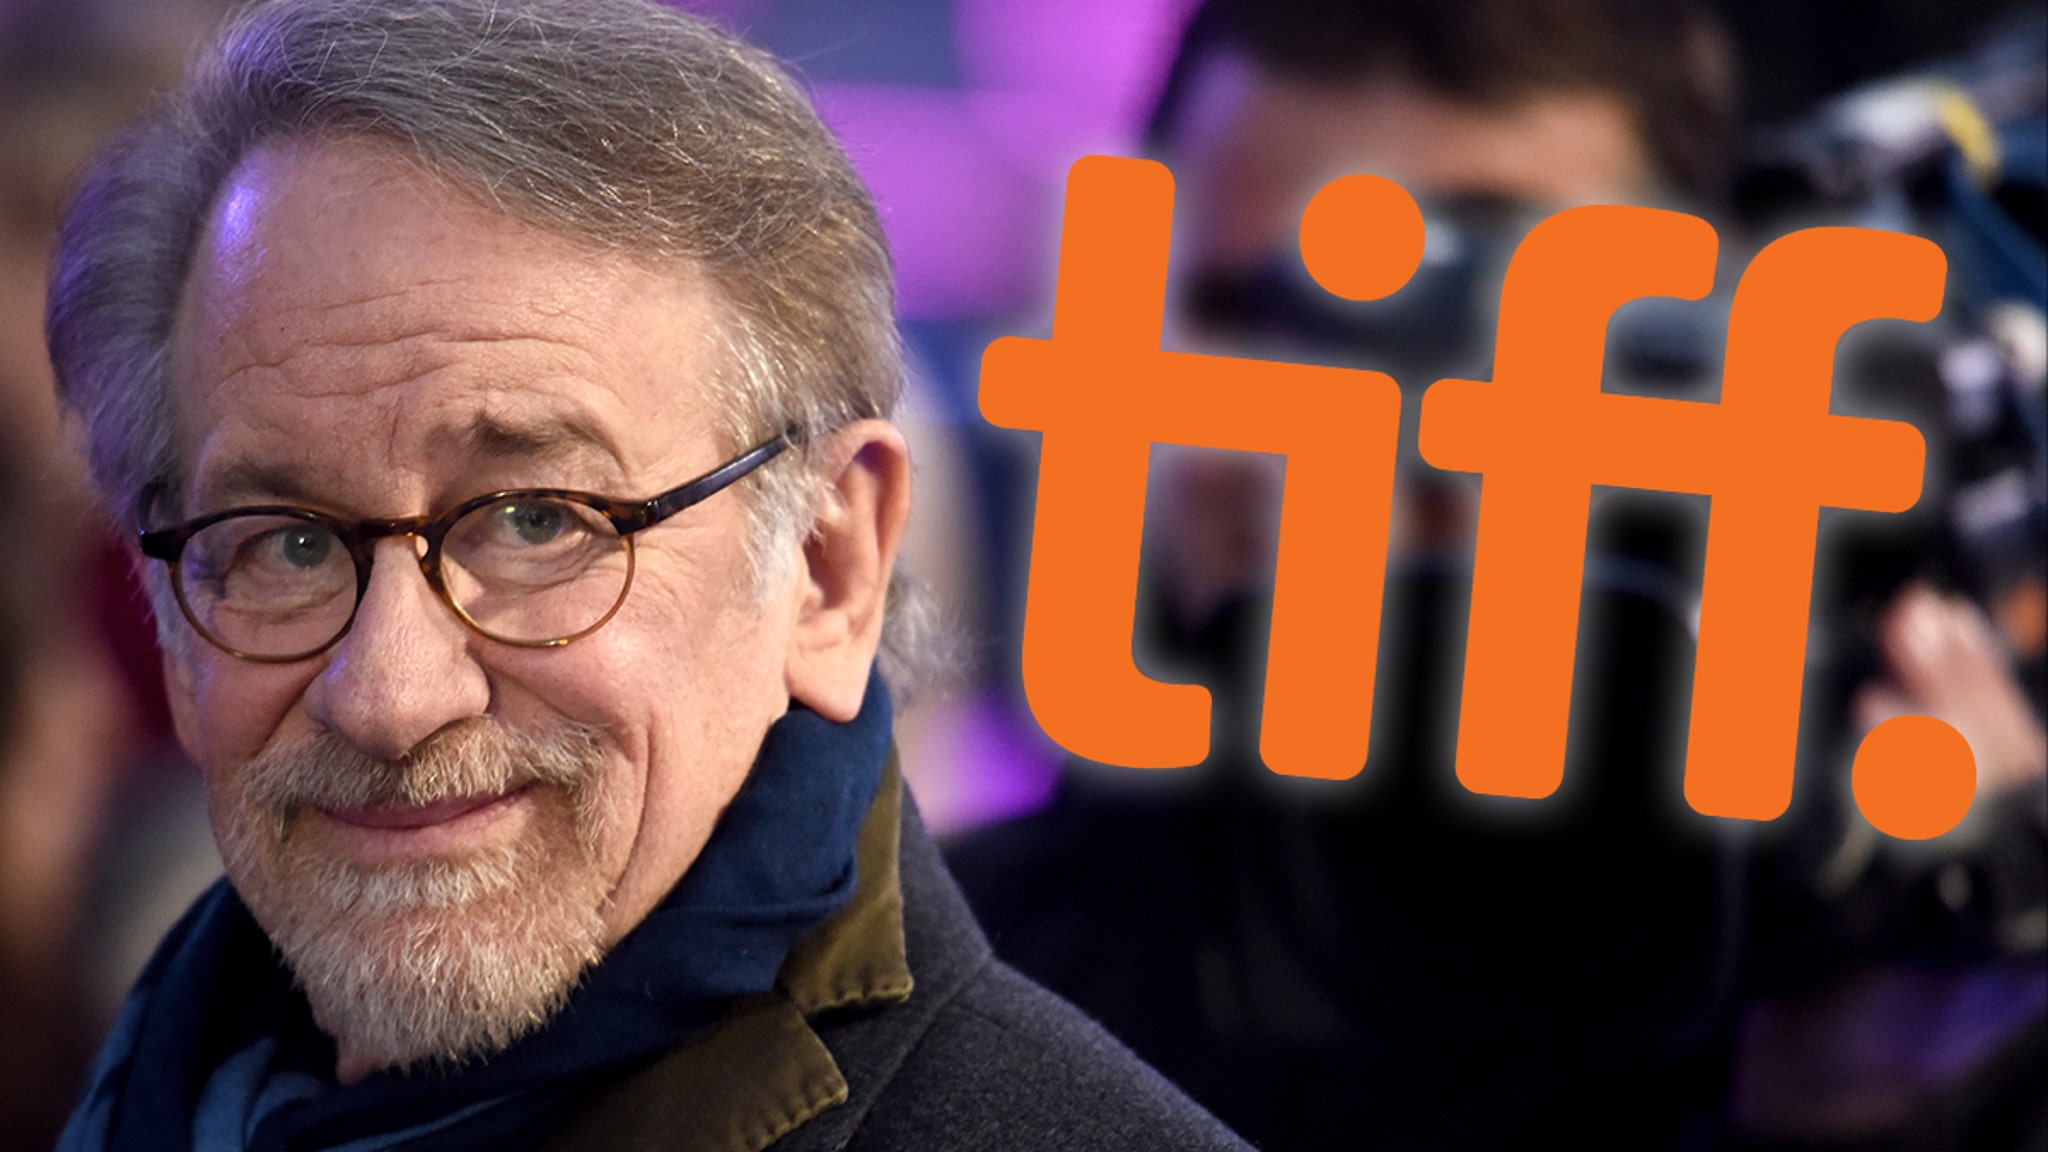 Steven Spielberg's 'The Fabelmans' will be suspended from TIFF